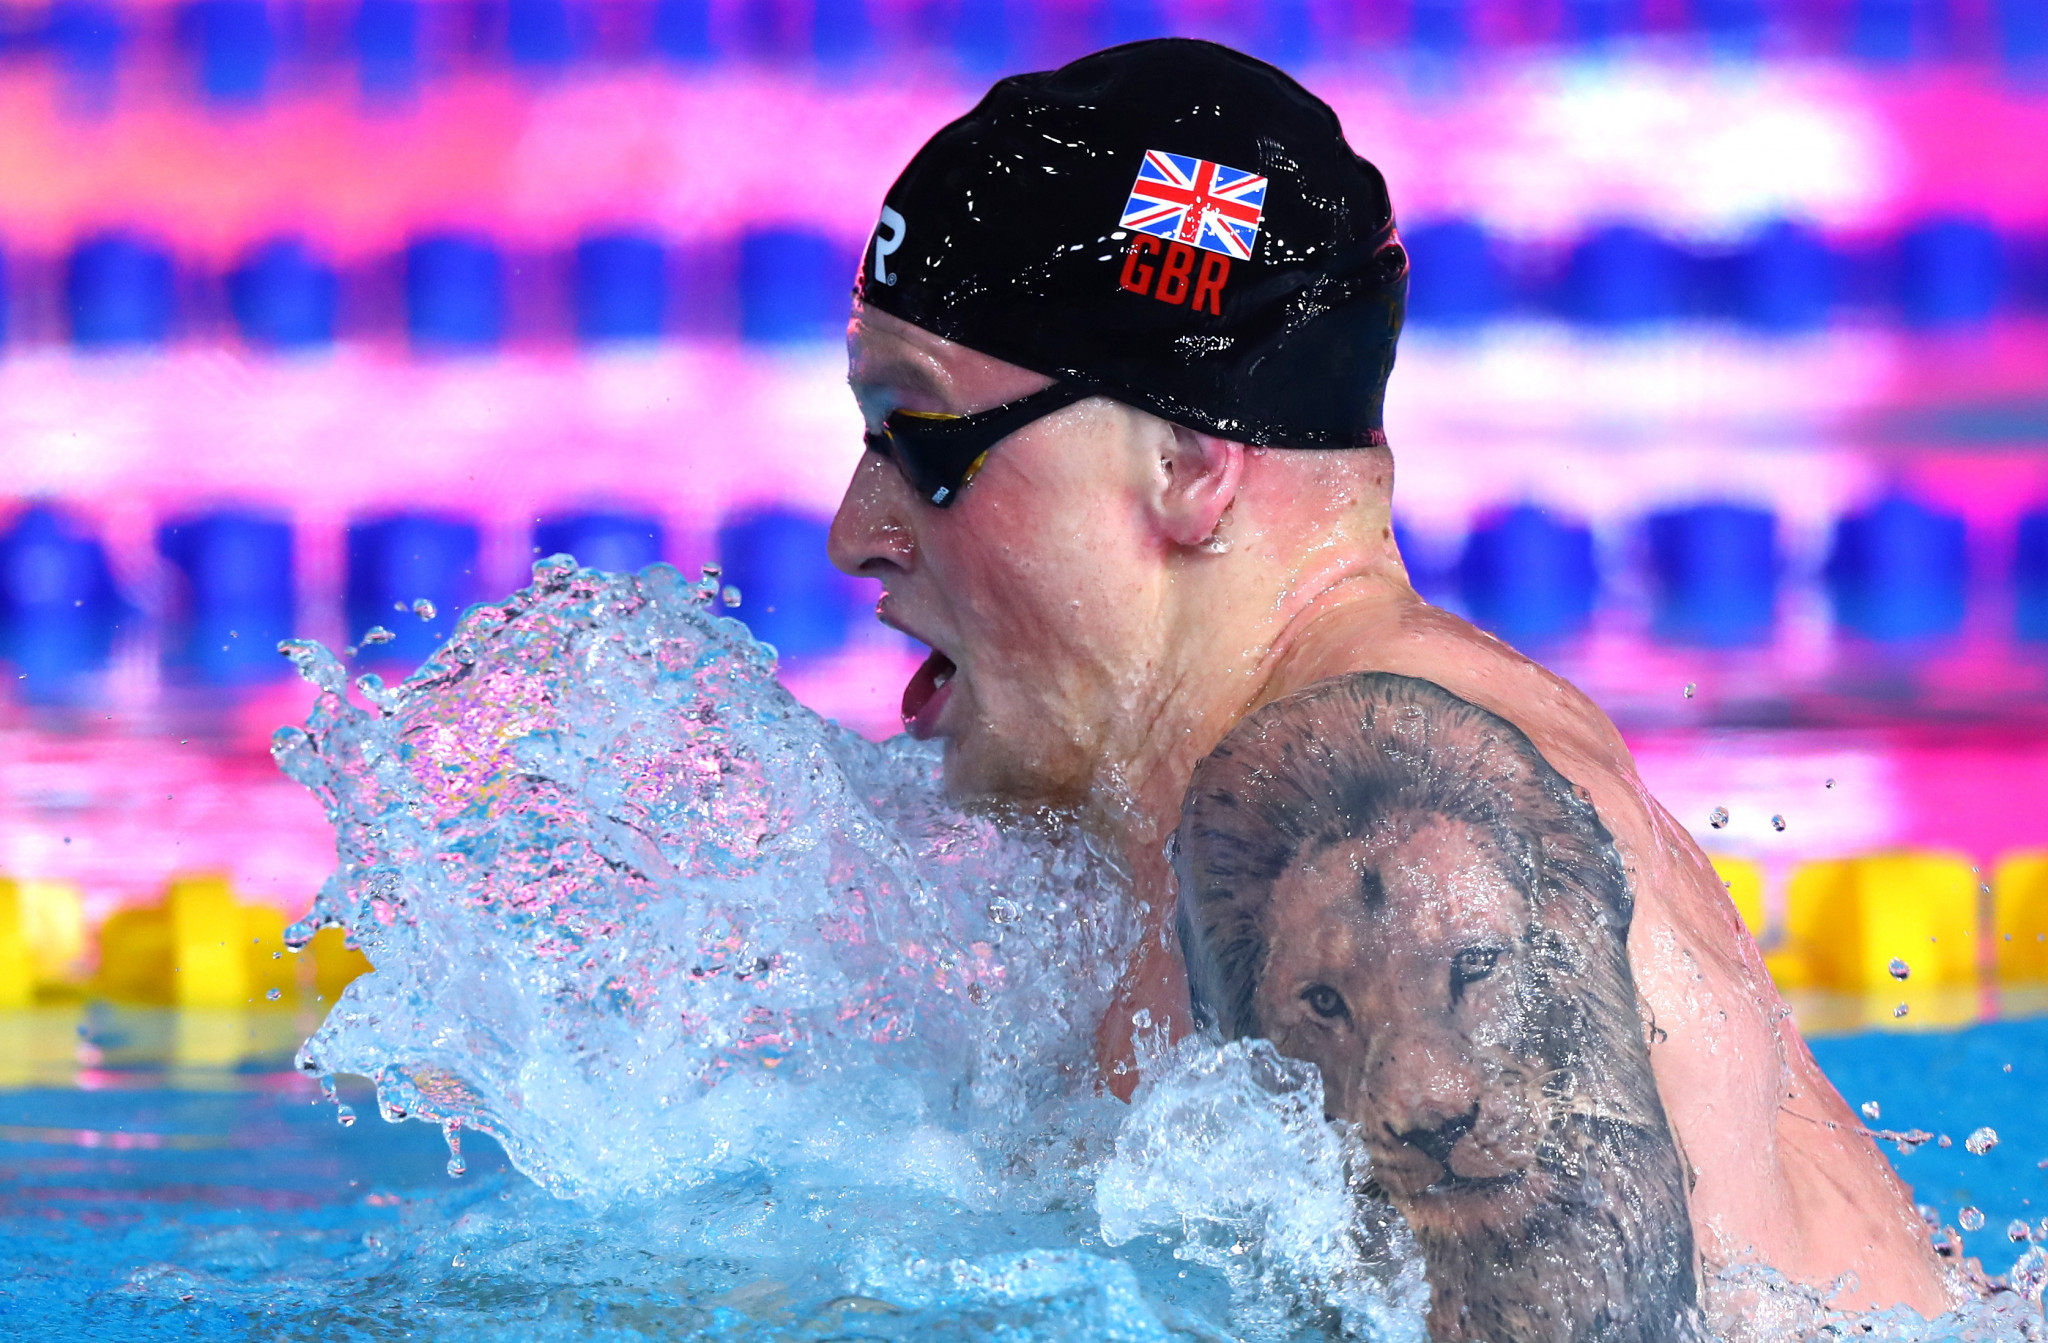 Olympic champion Adam Peaty cruised into the men's 100m breaststroke final ©Getty Images